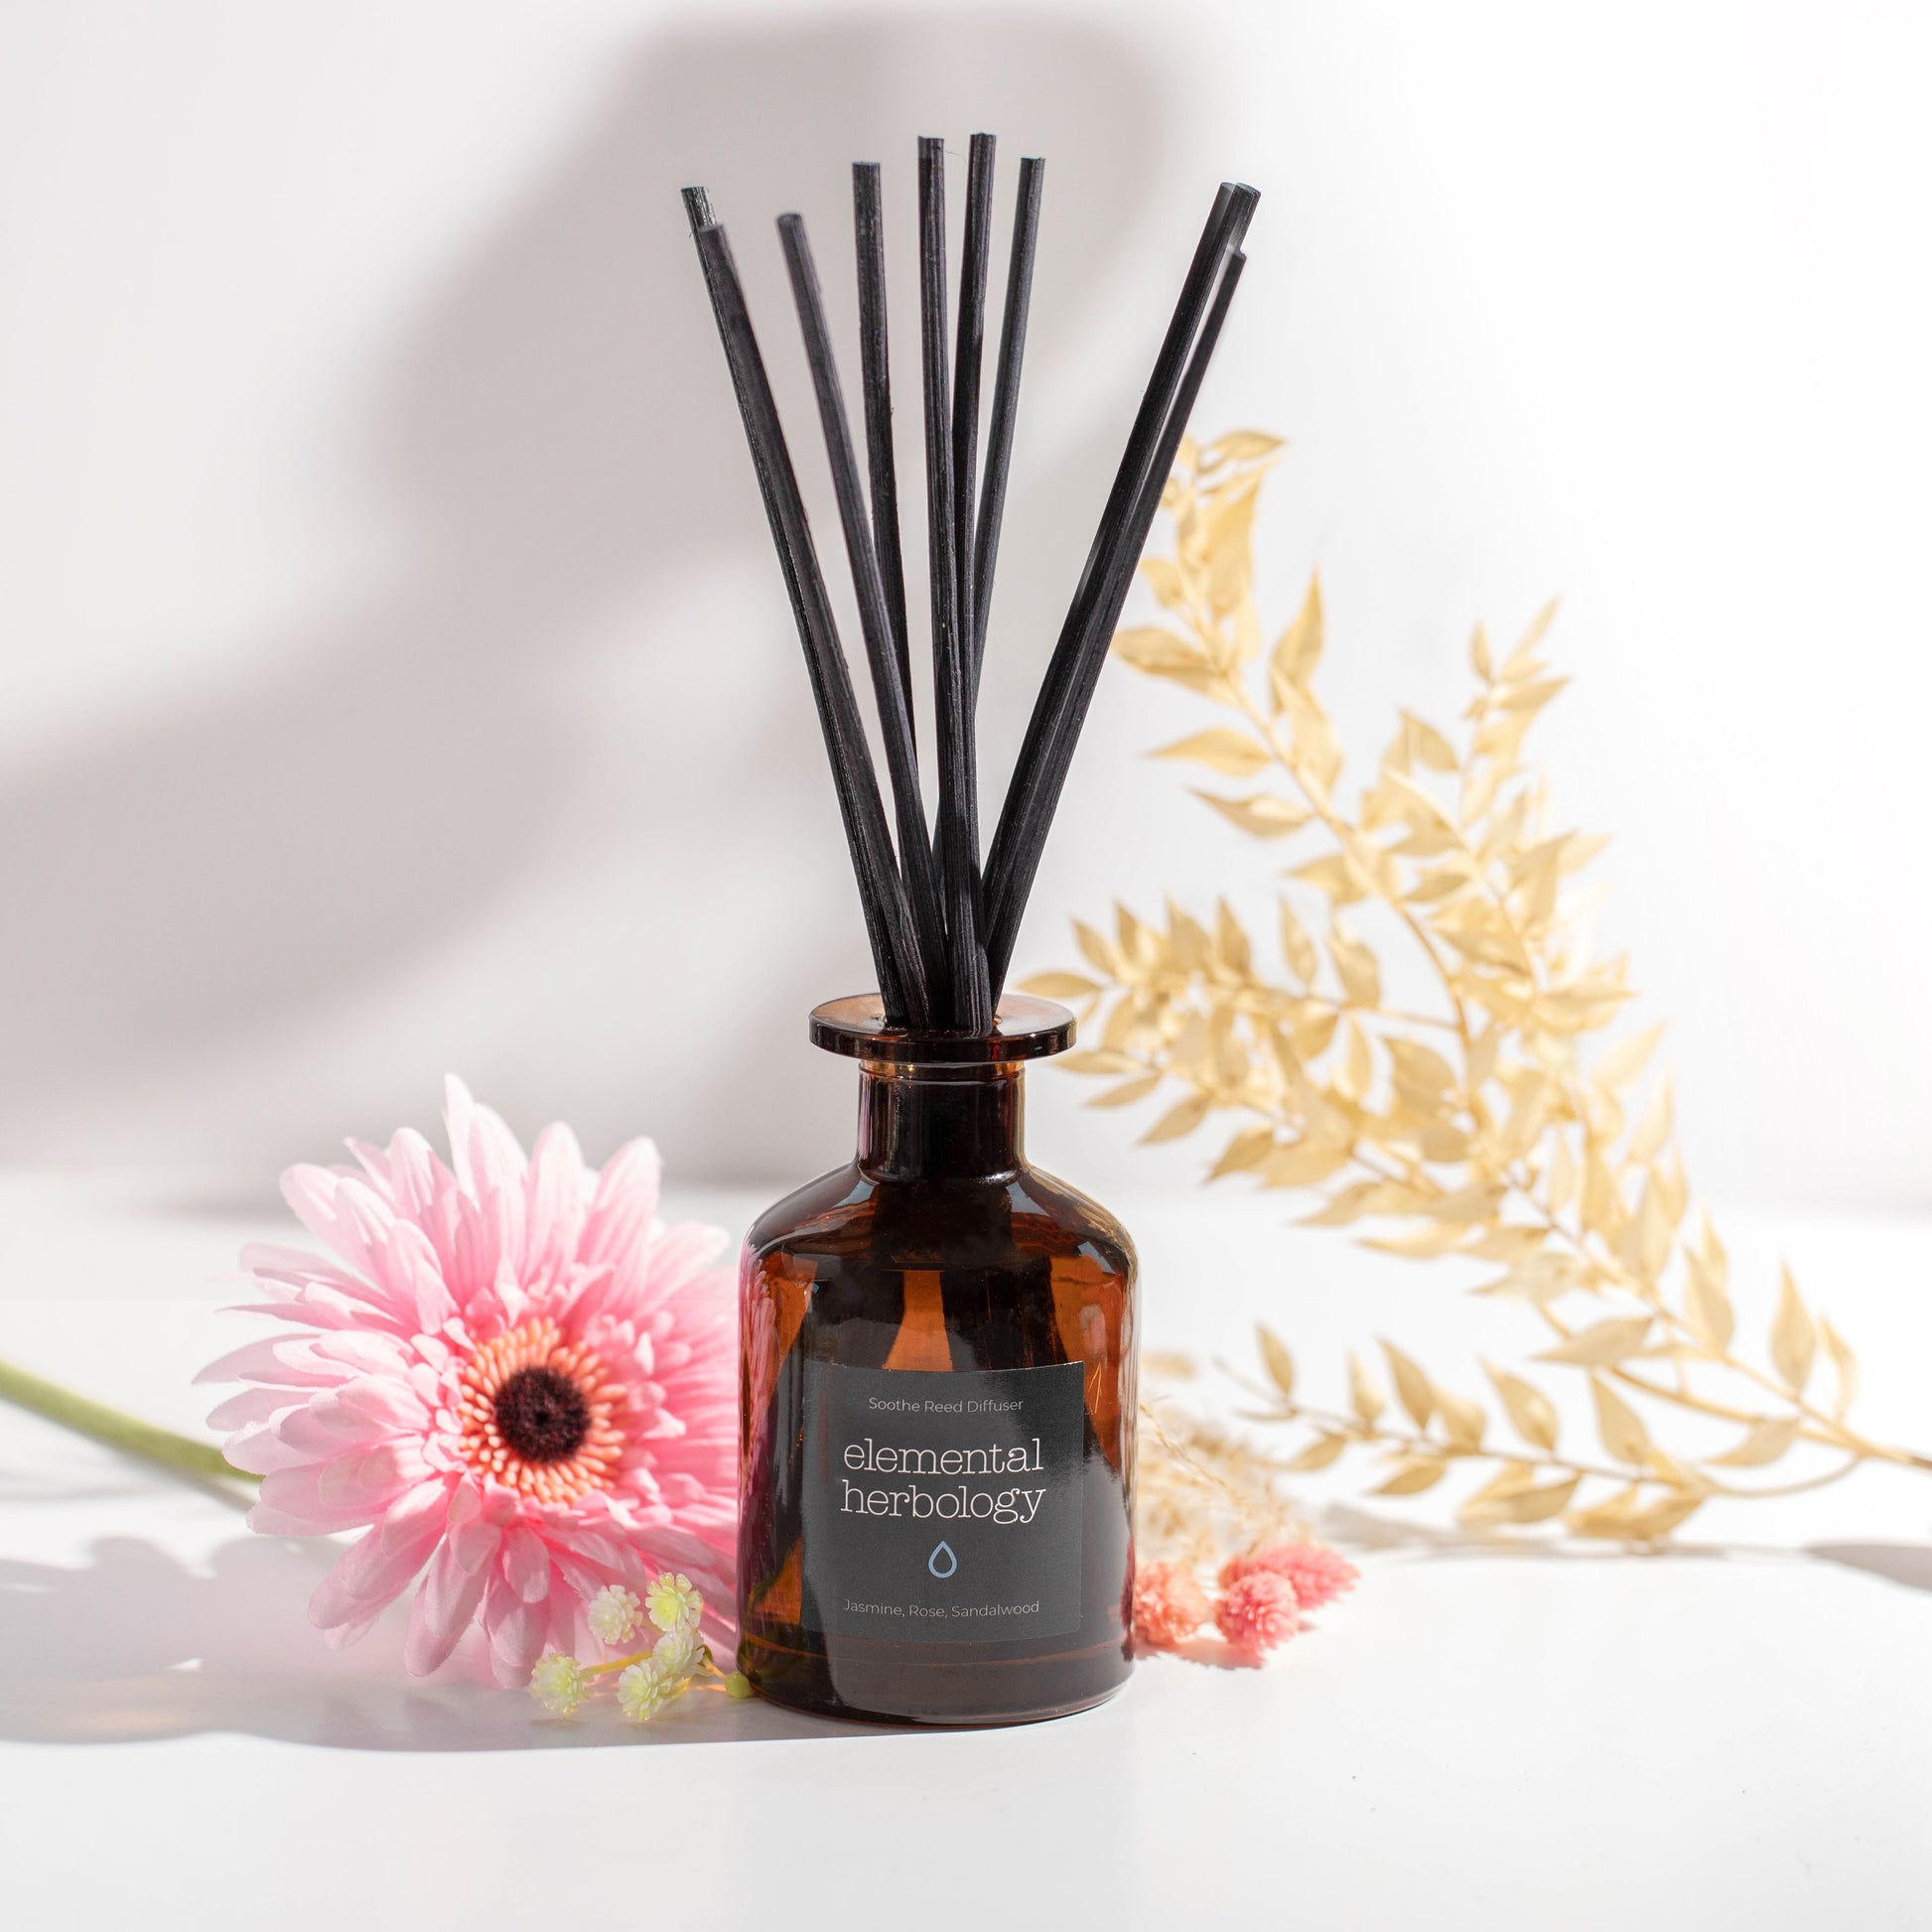 Room fragrance reed diffuser with soothing aromas of sweet jasmine, fresh rose and warming sandalwood